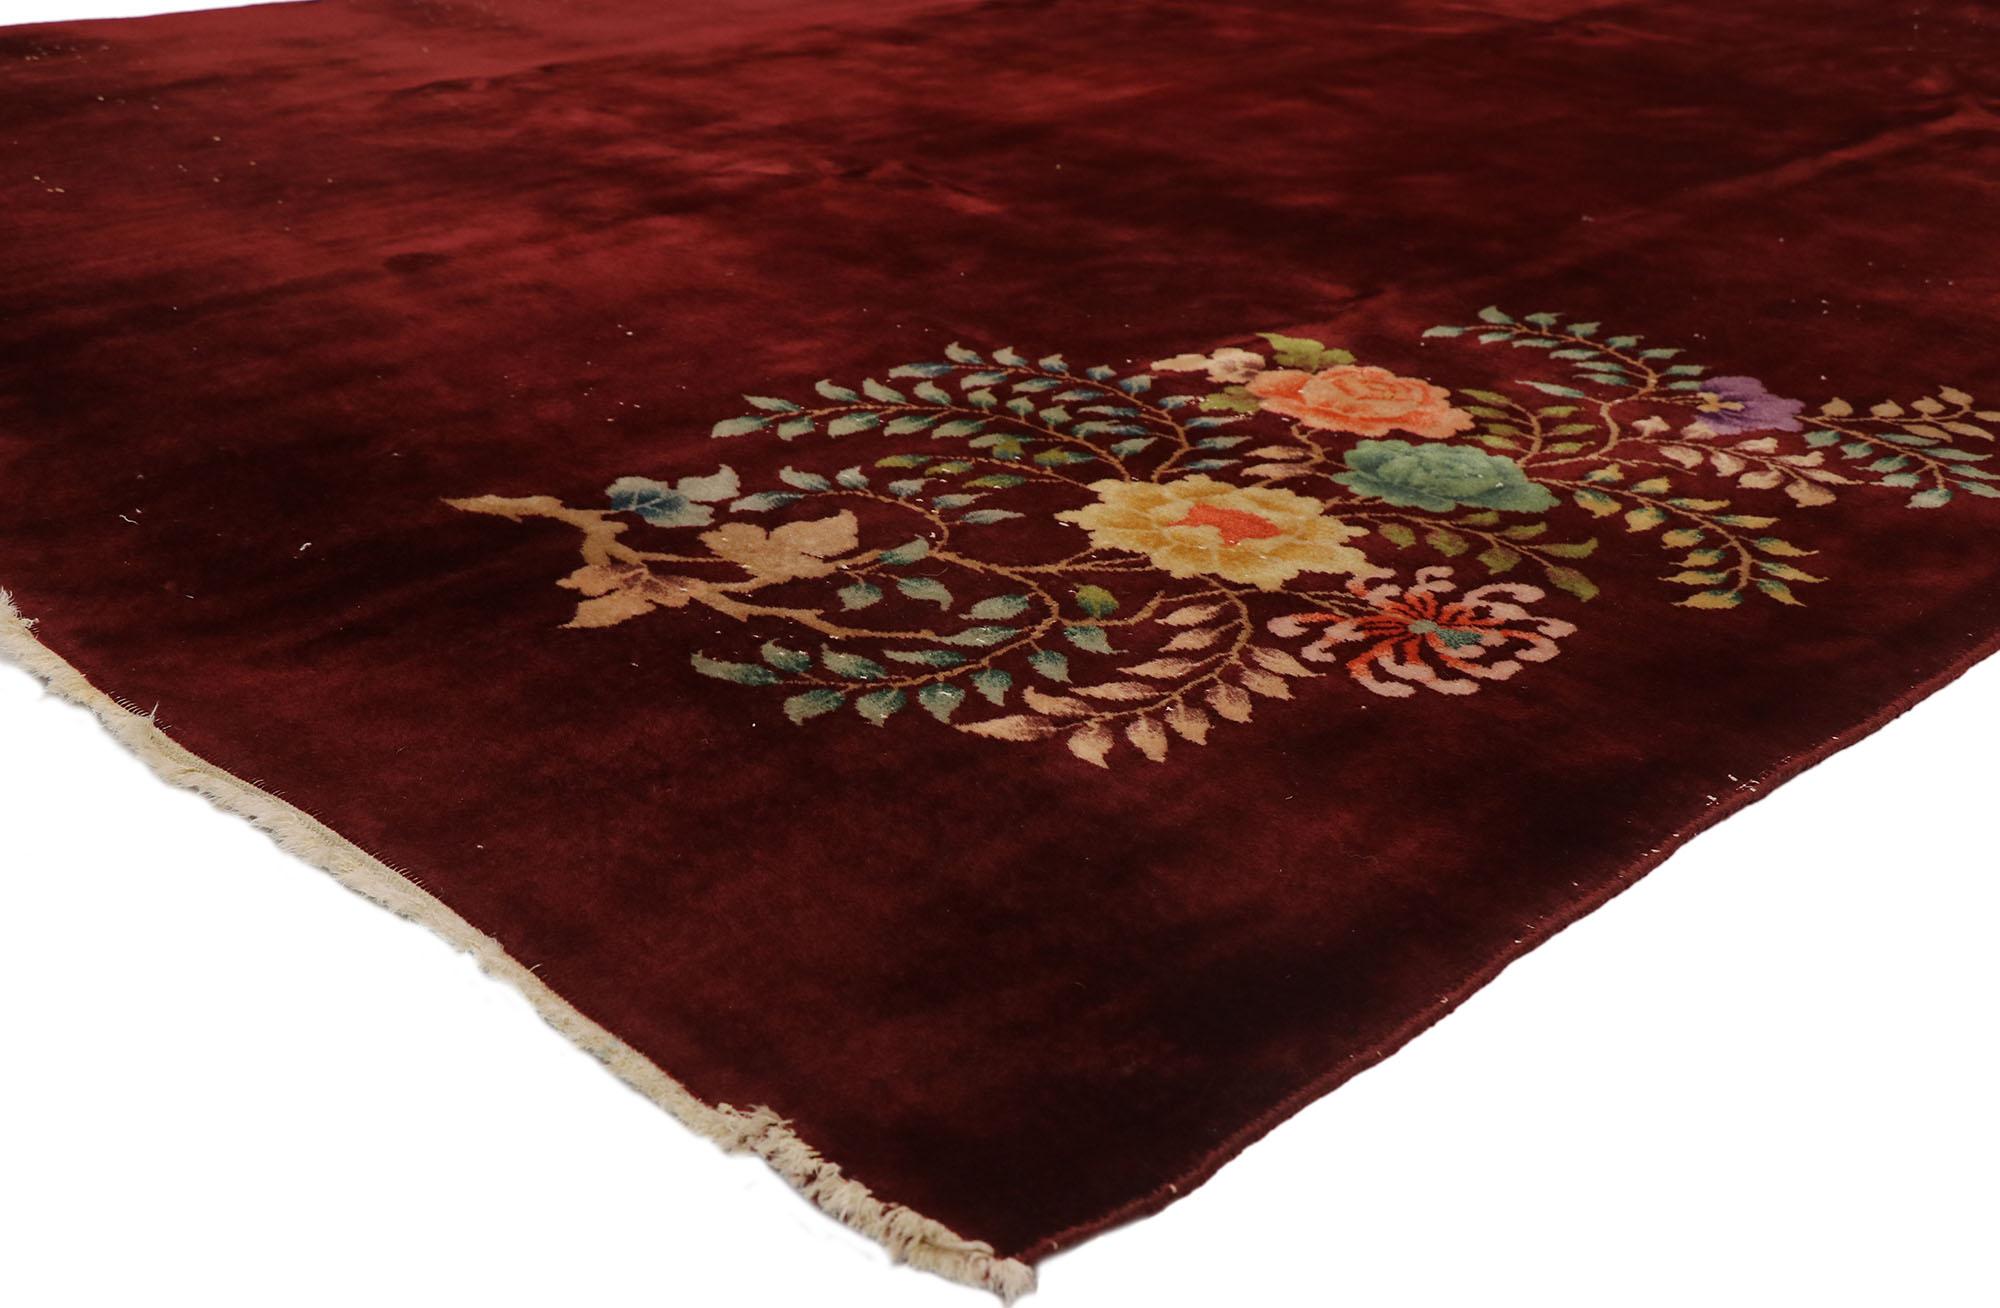 77423, antique Chinese Art Deco rug inspired by Walter Nichols. Drawing inspiration from Walter Nichols, this hand knotted wool antique Chinese Art Deco rug displays a sense of splendor and vitality than cannot be contained. It features an